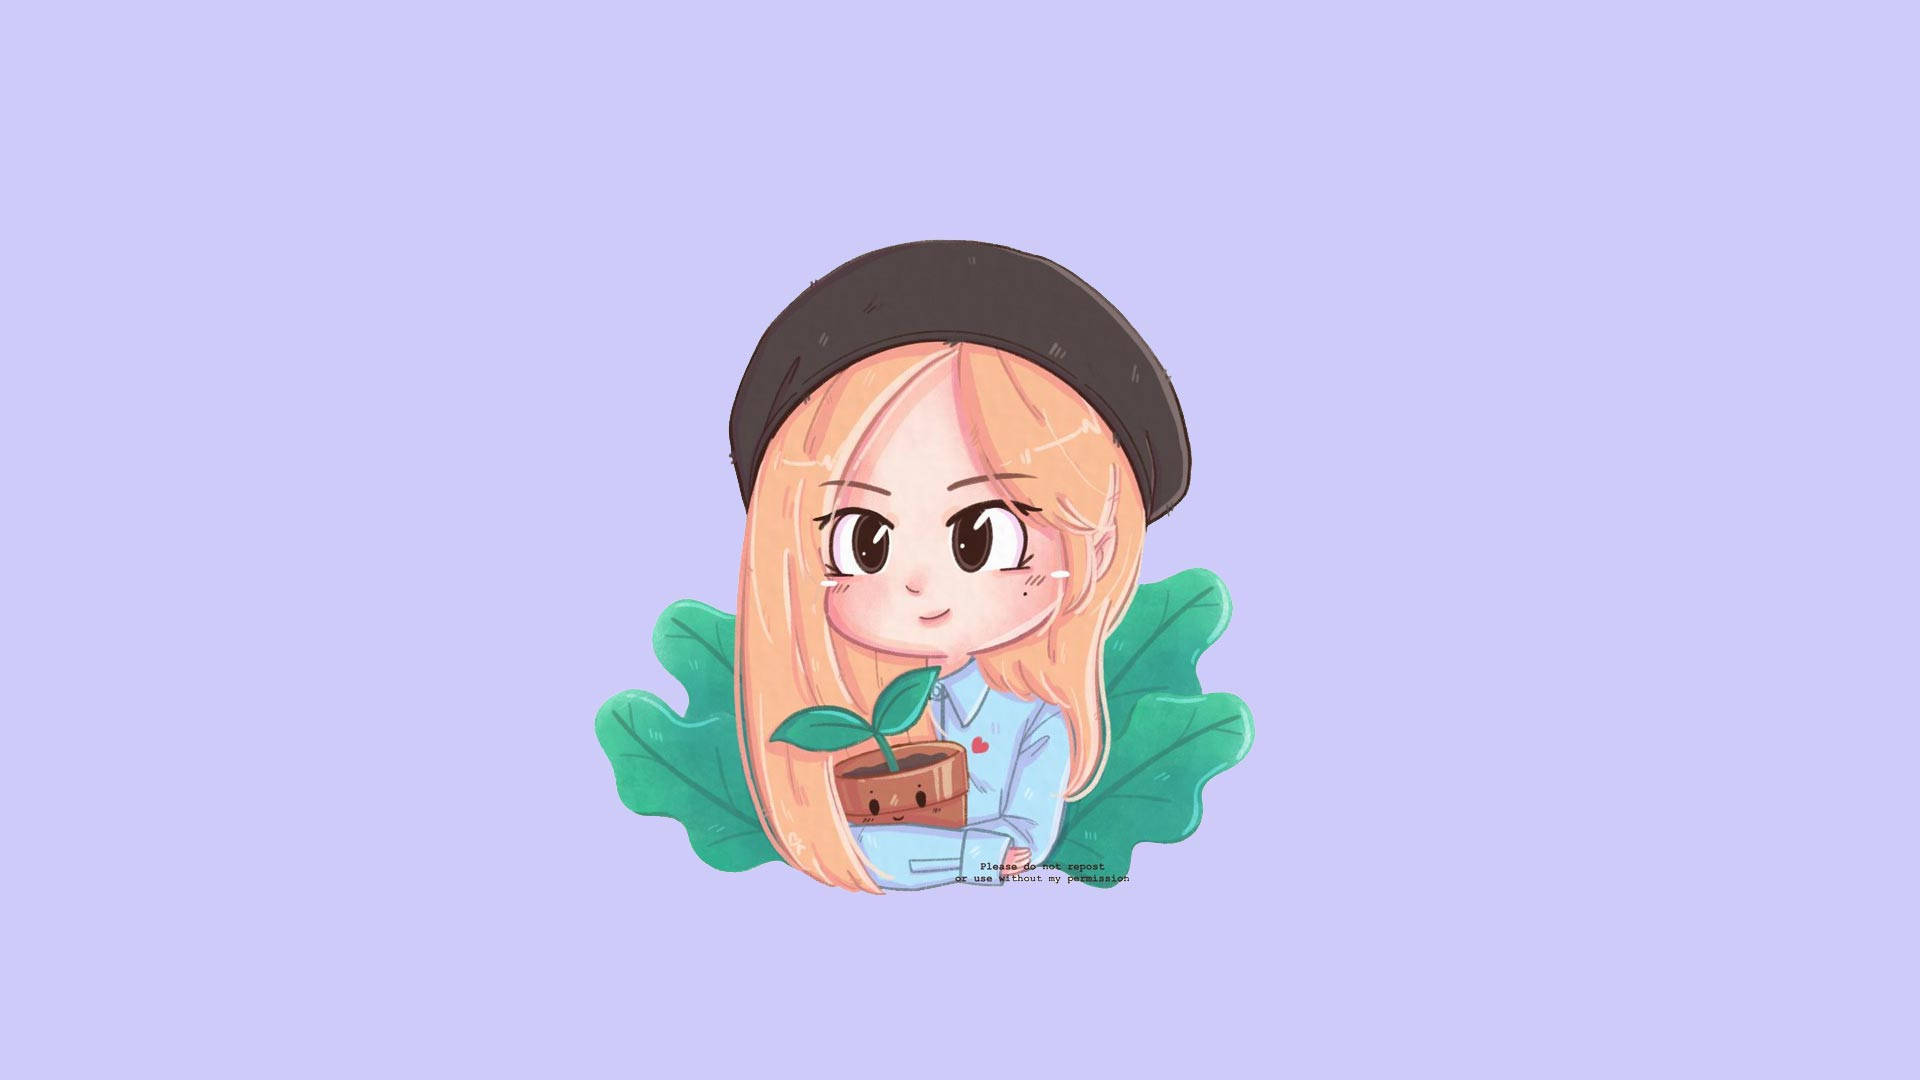 Blackpink Anime Version With Plants Background